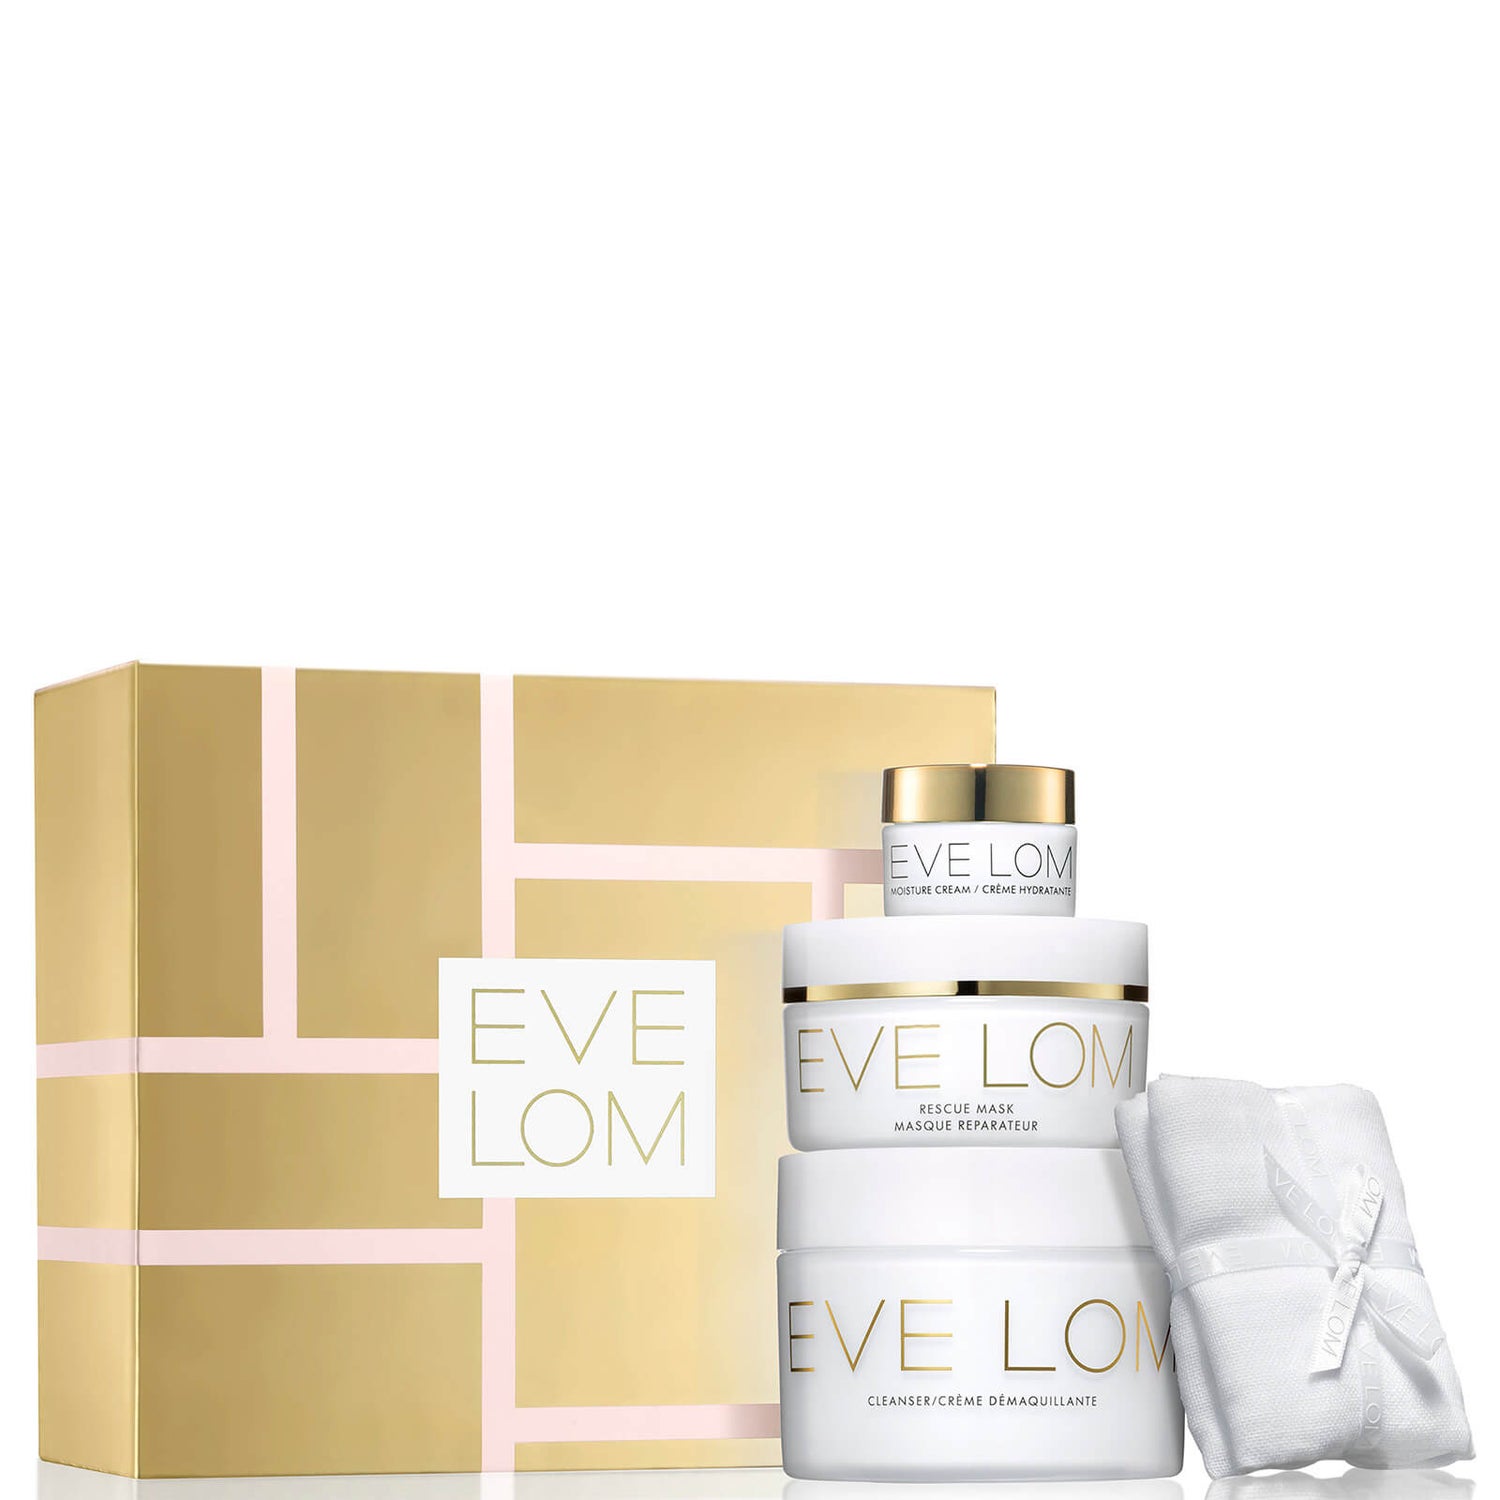 Eve Lom Holiday Deluxe Hut Group Exclusive Rescue Ritual Gift Set